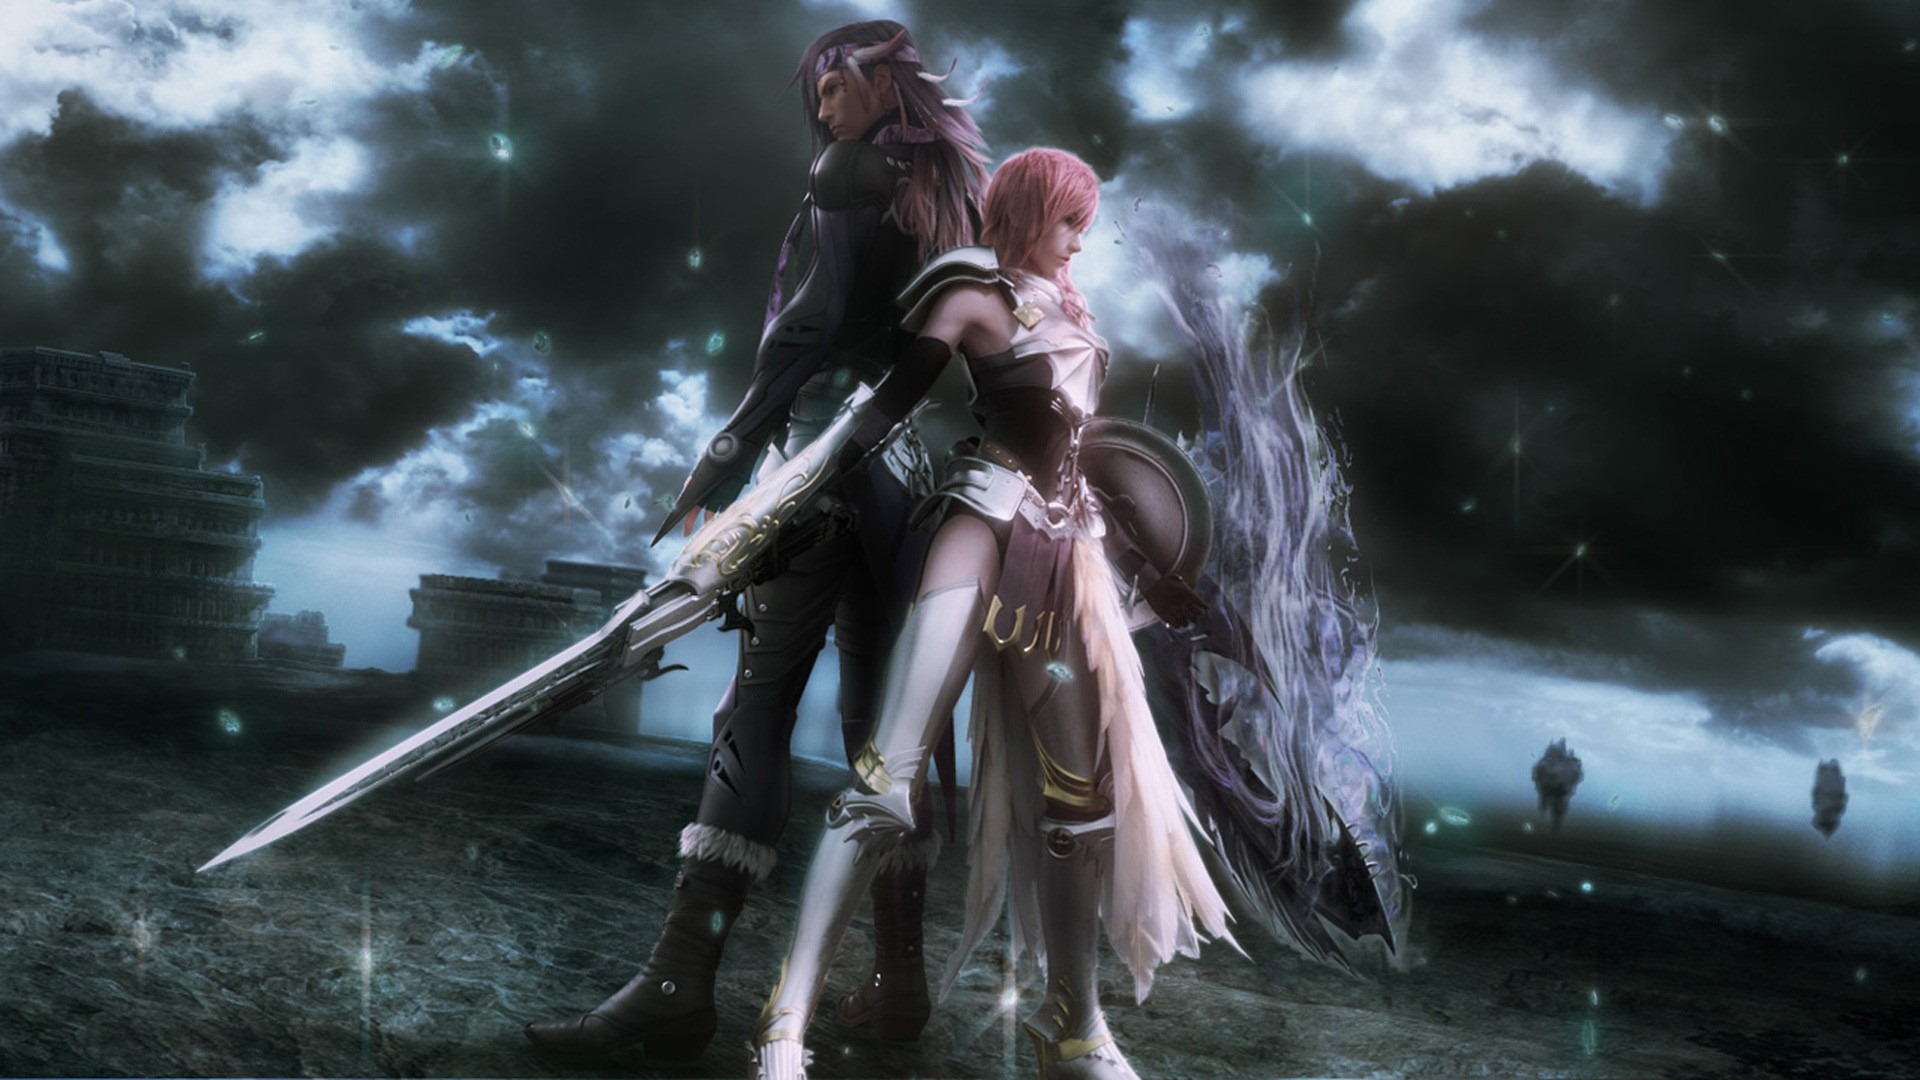 ff xiii 2 download free